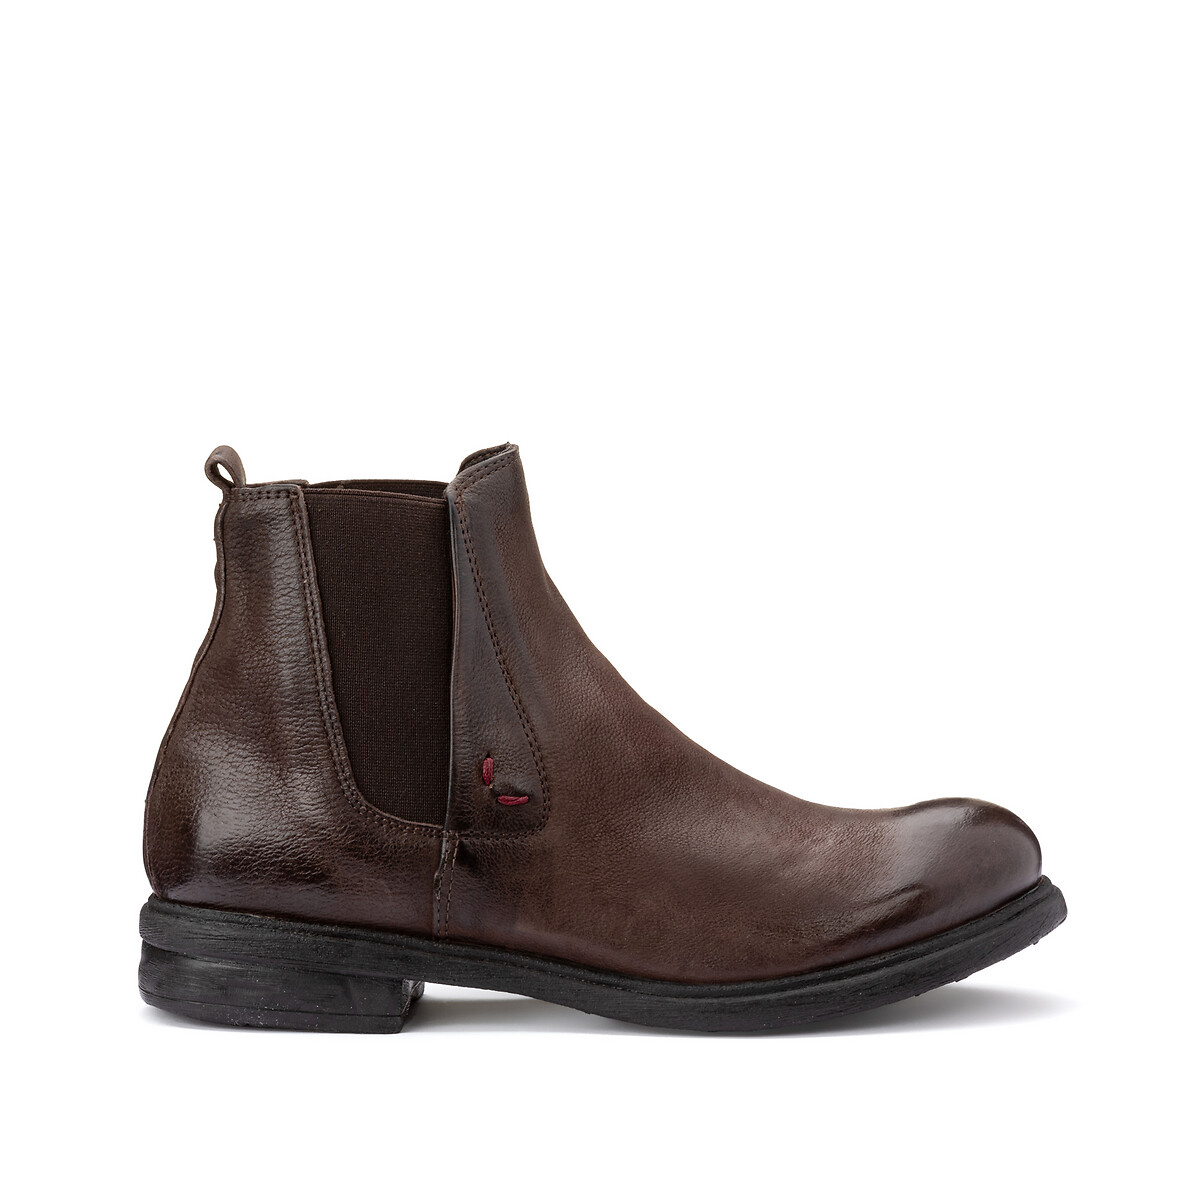 Elasticated leather ankle boots, brown, Mjus | La Redoute